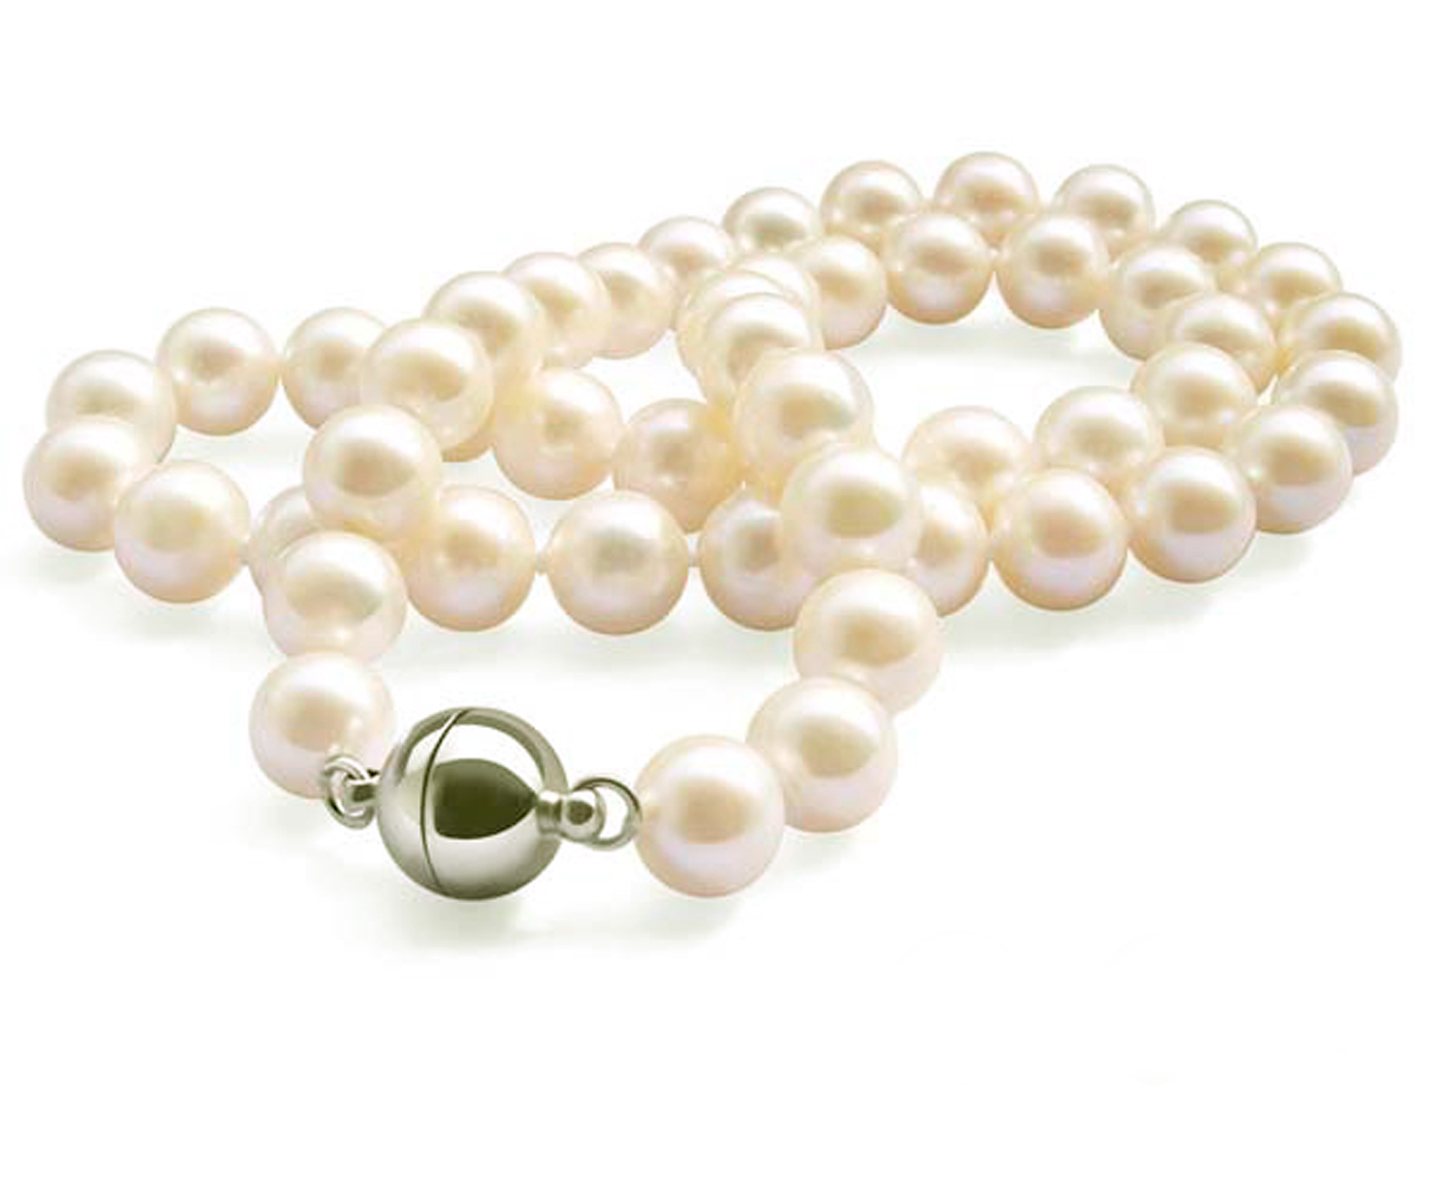 8-9mm AA Round Pearl Necklace Magnetic Clasp Pink, Mauve, White Black Pearls Mauve